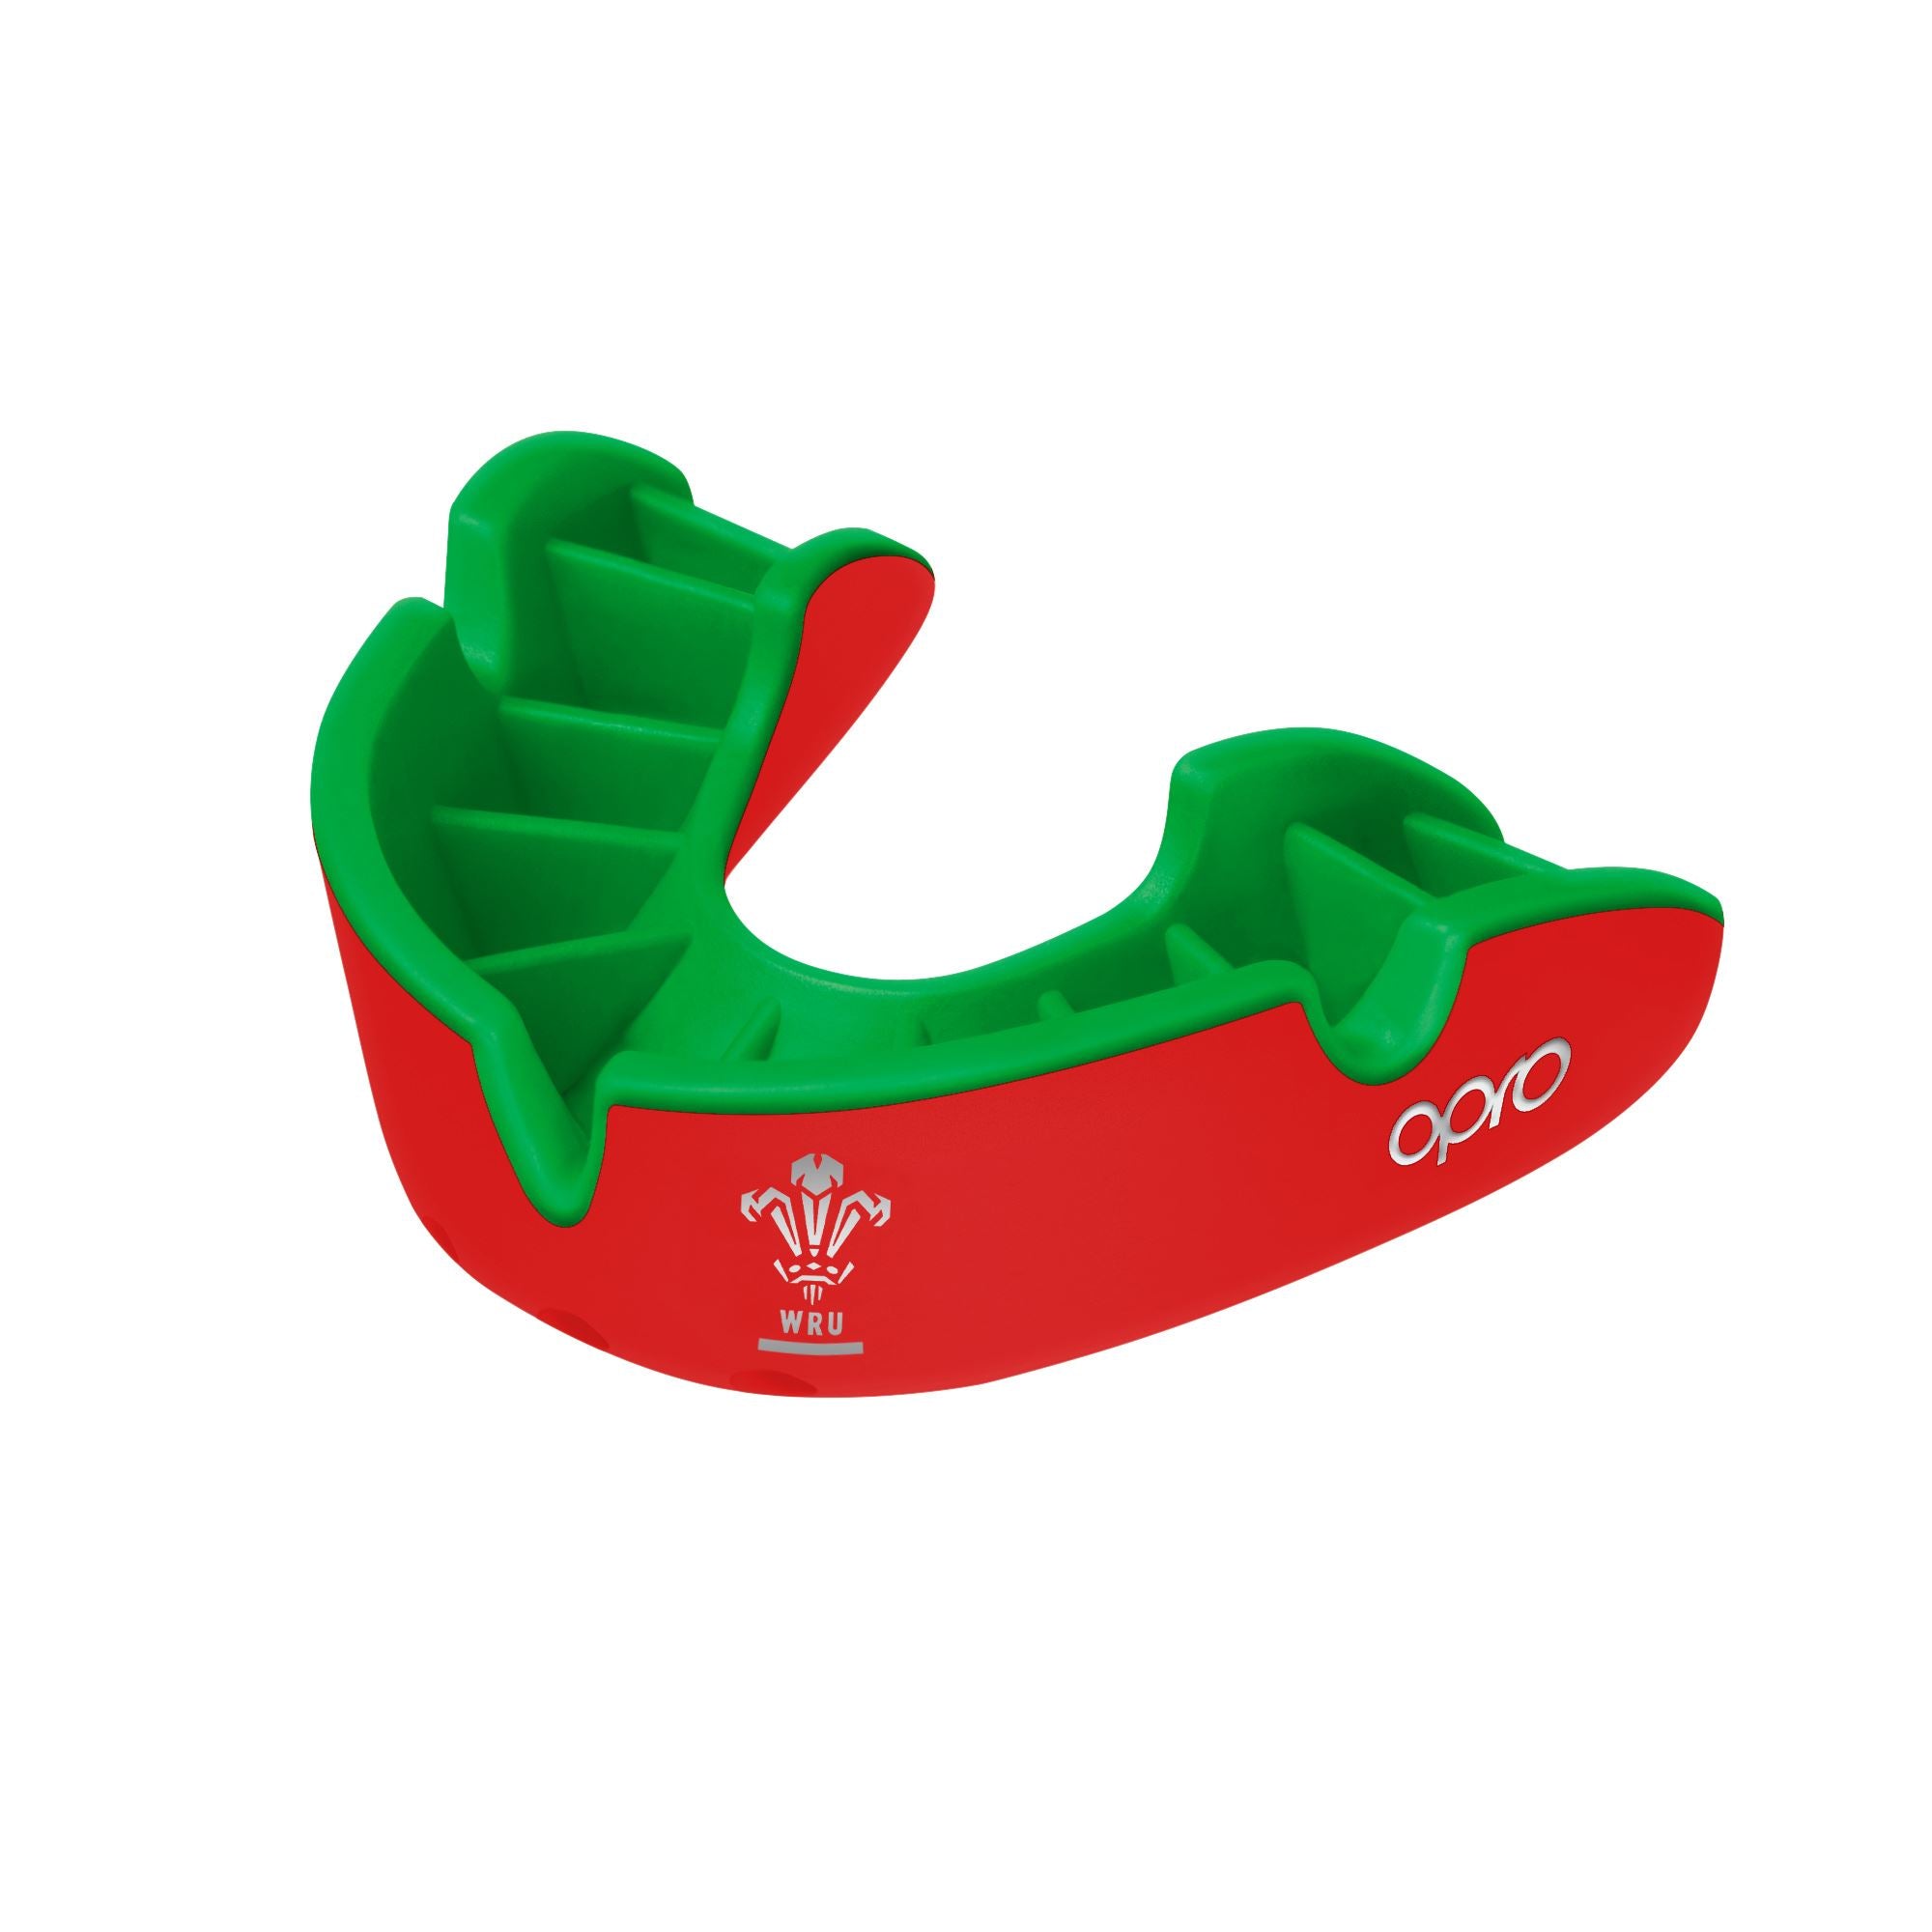 Men's Rugby Protective Mouthguard OPRO Self-Fit Silver 2022 Wales Rugby Union